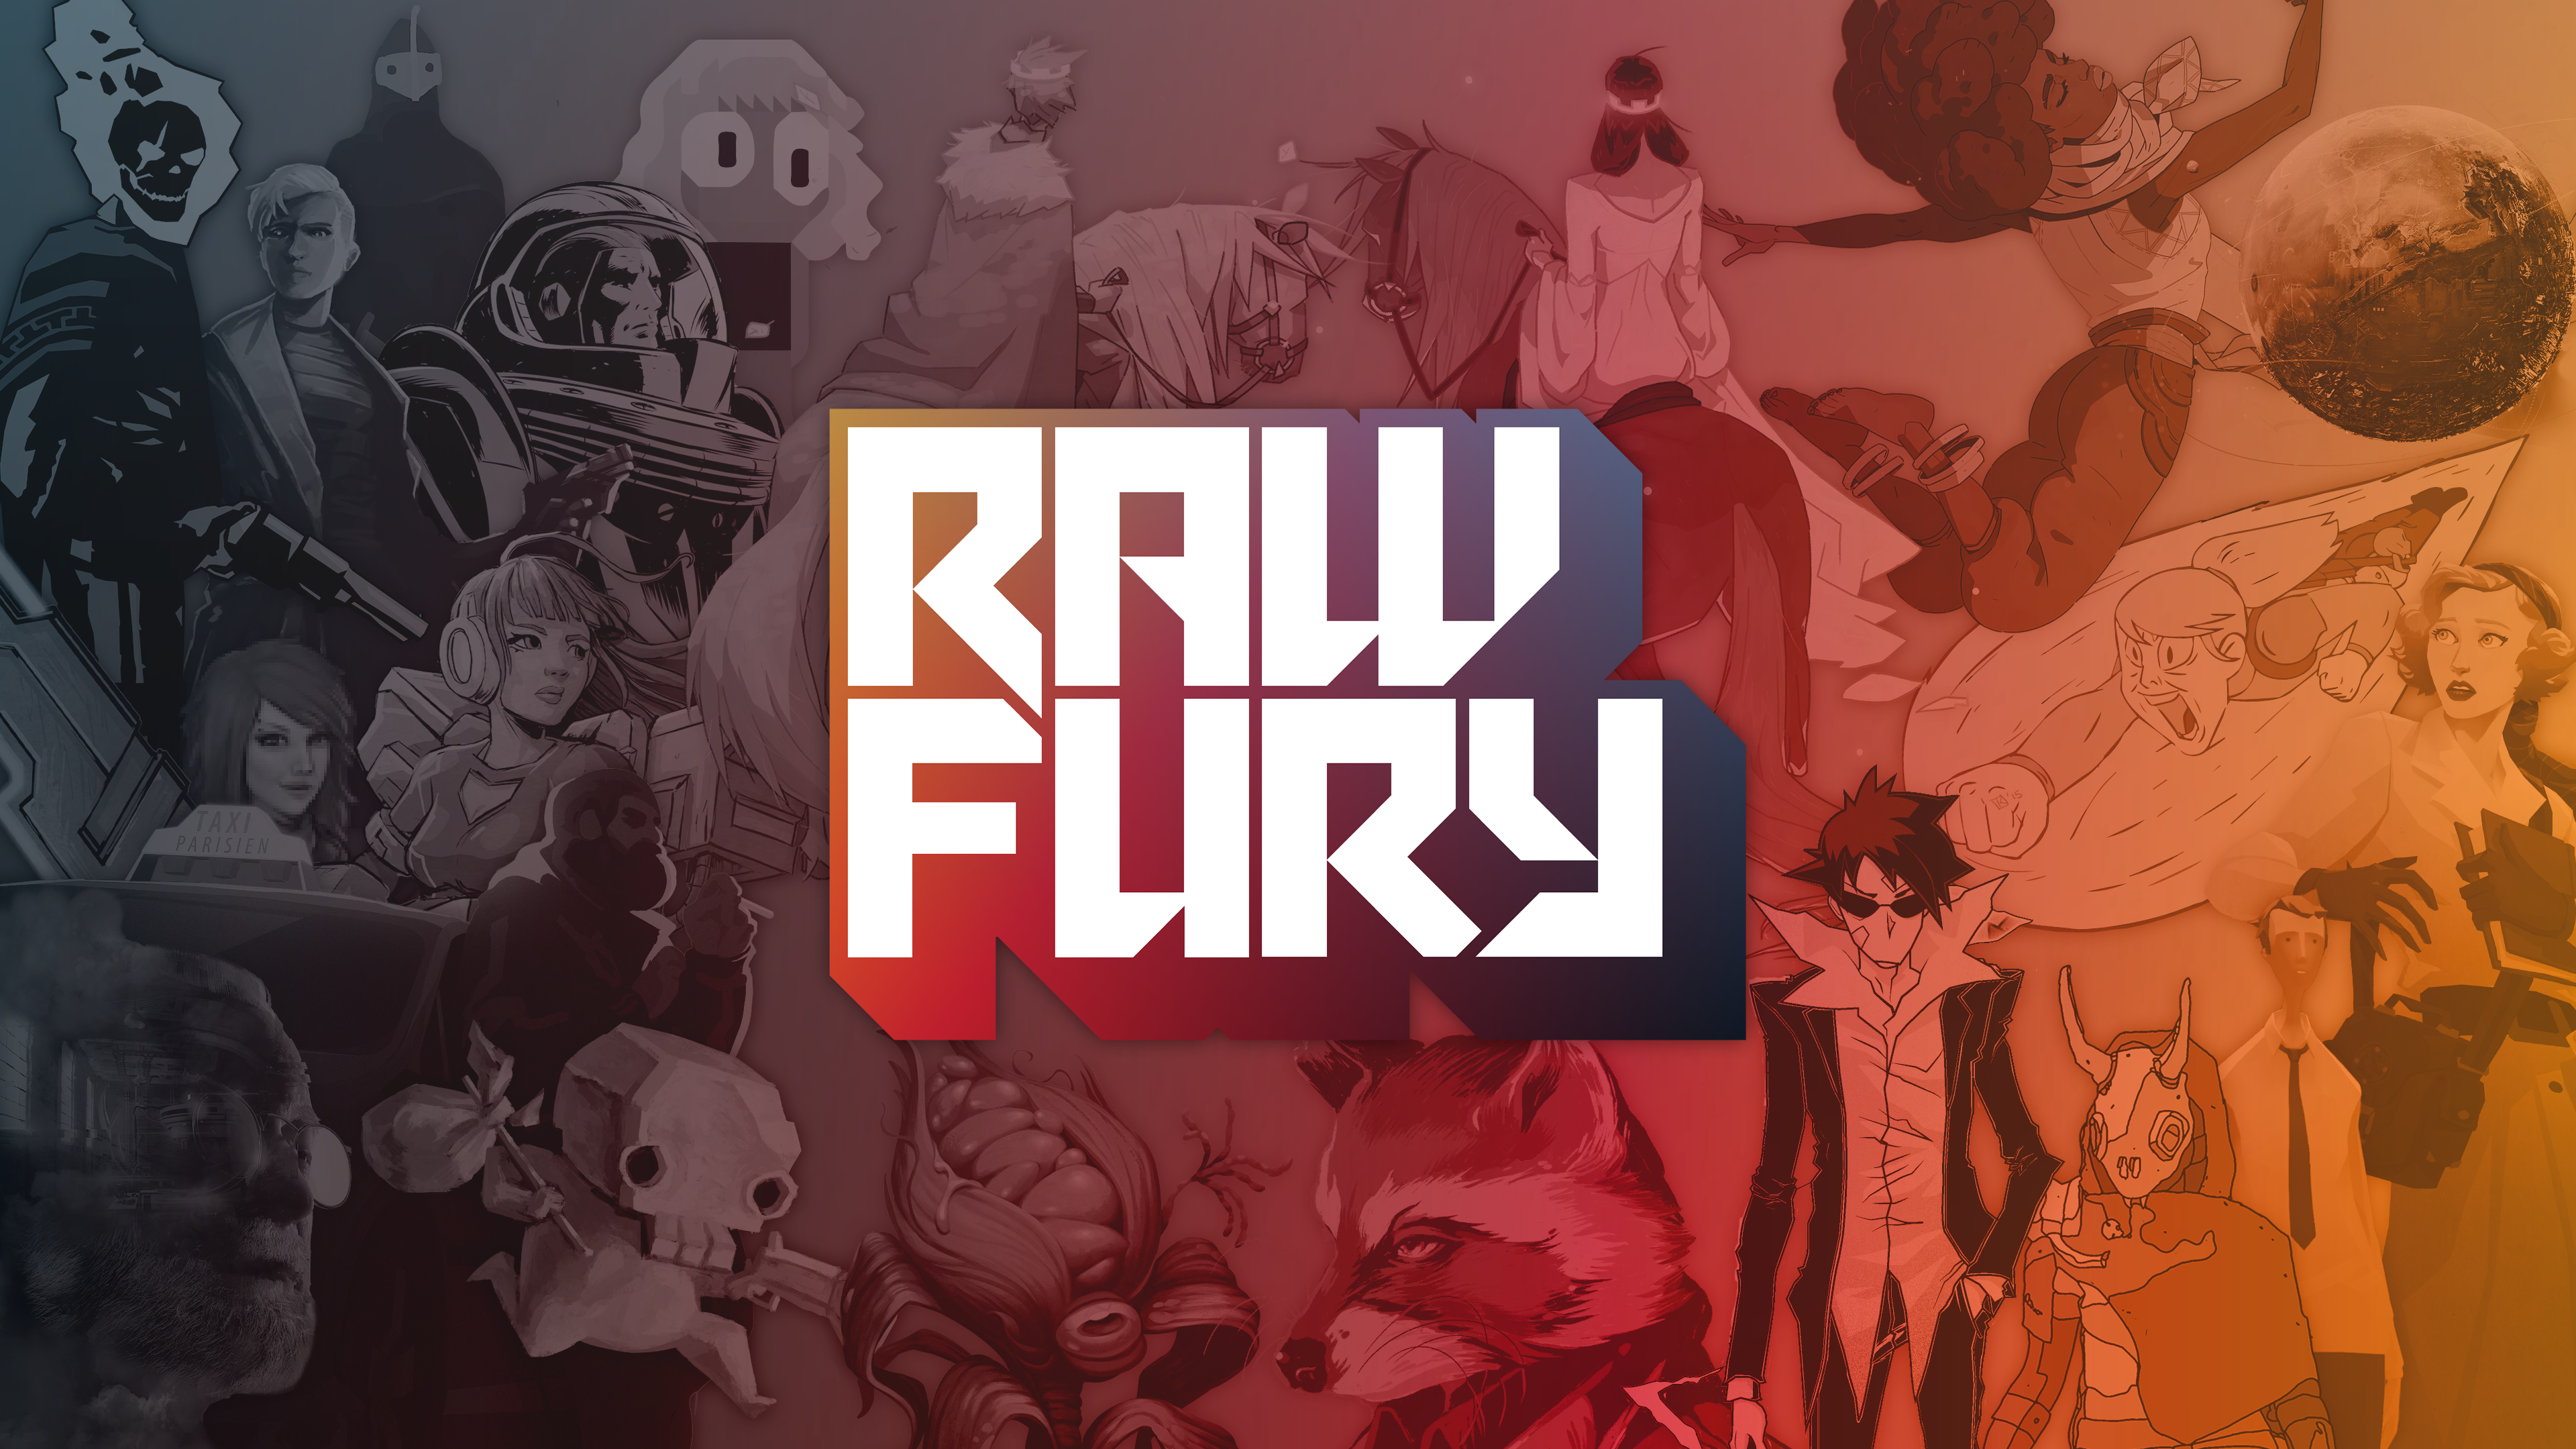 A collage featuring art from various Raw Fury games